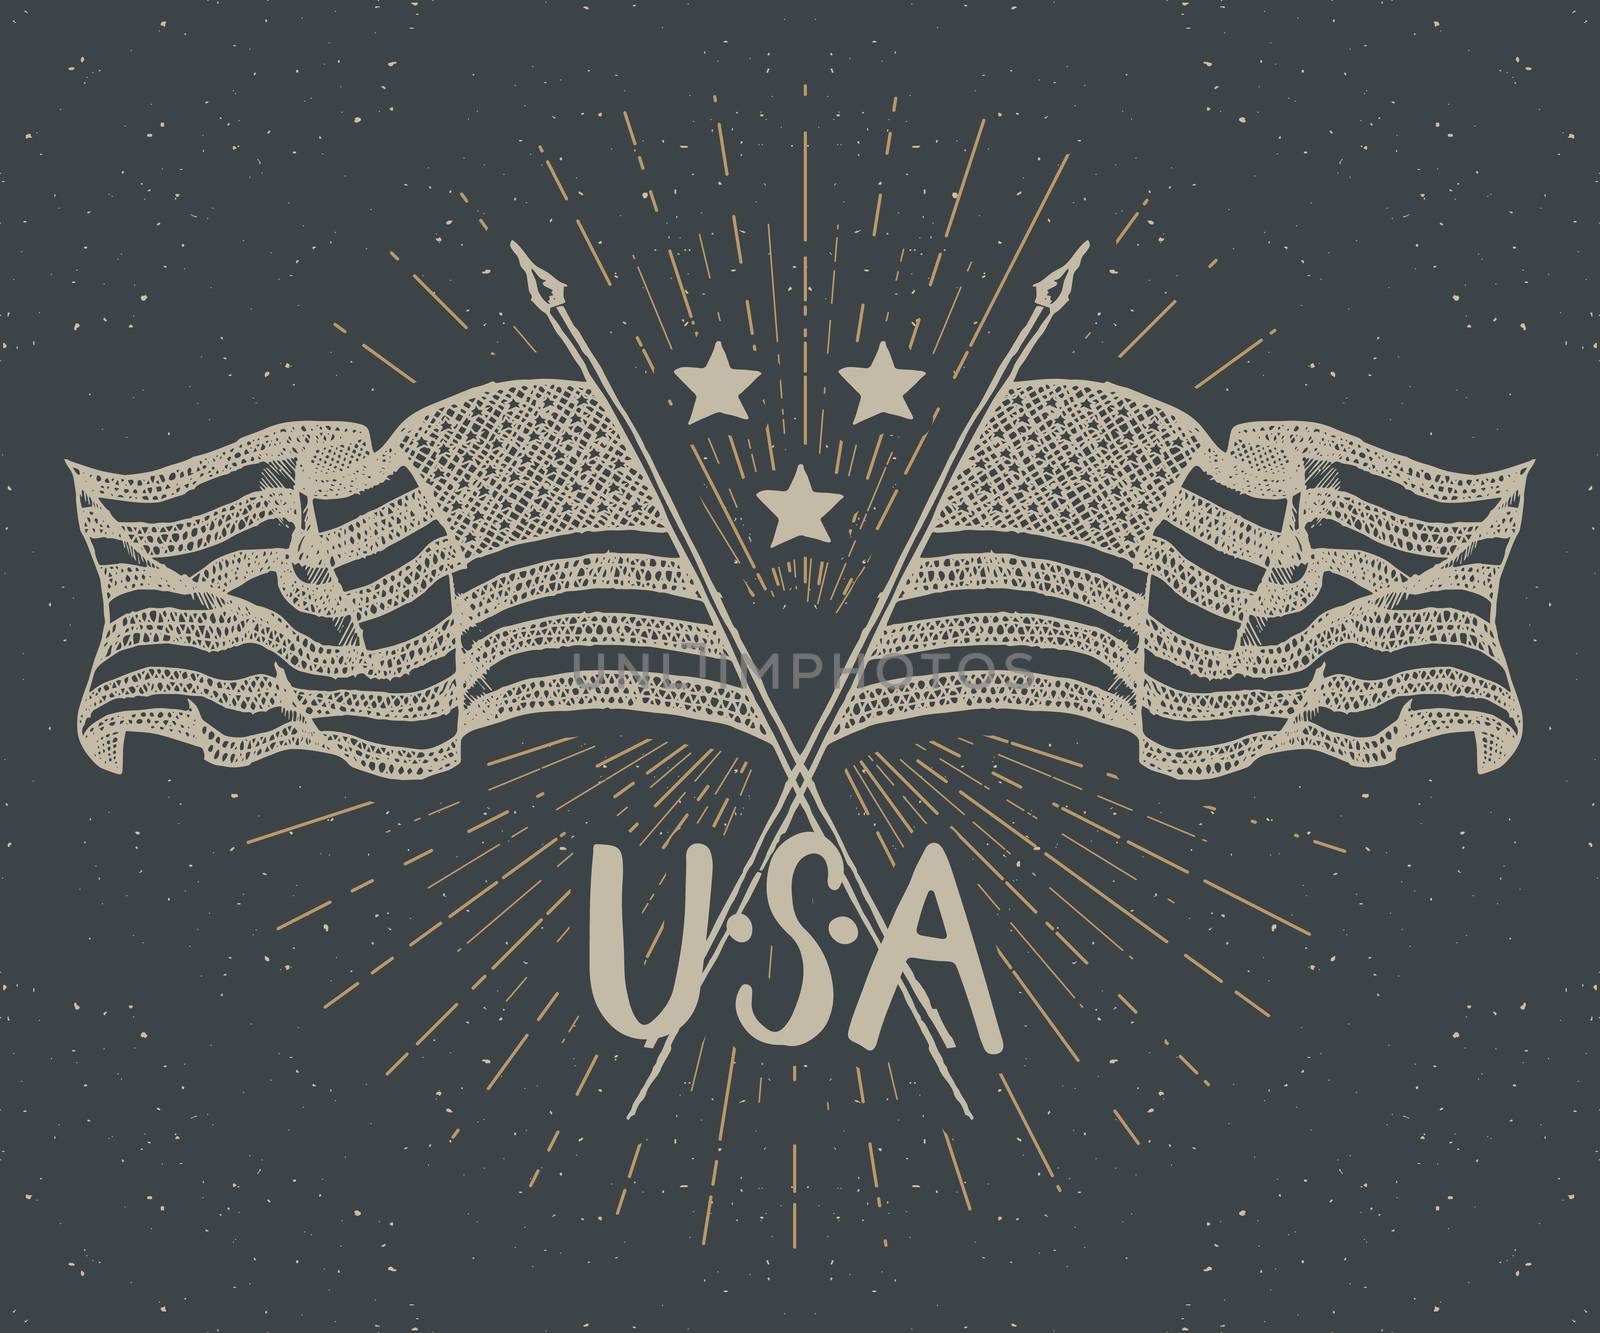 Vintage label, Hand drawn crossed USA flags, Happy Independence Day, fourth of july celebration, greeting card, grunge textured retro badge, typography design vector illustration by Lemon_workshop